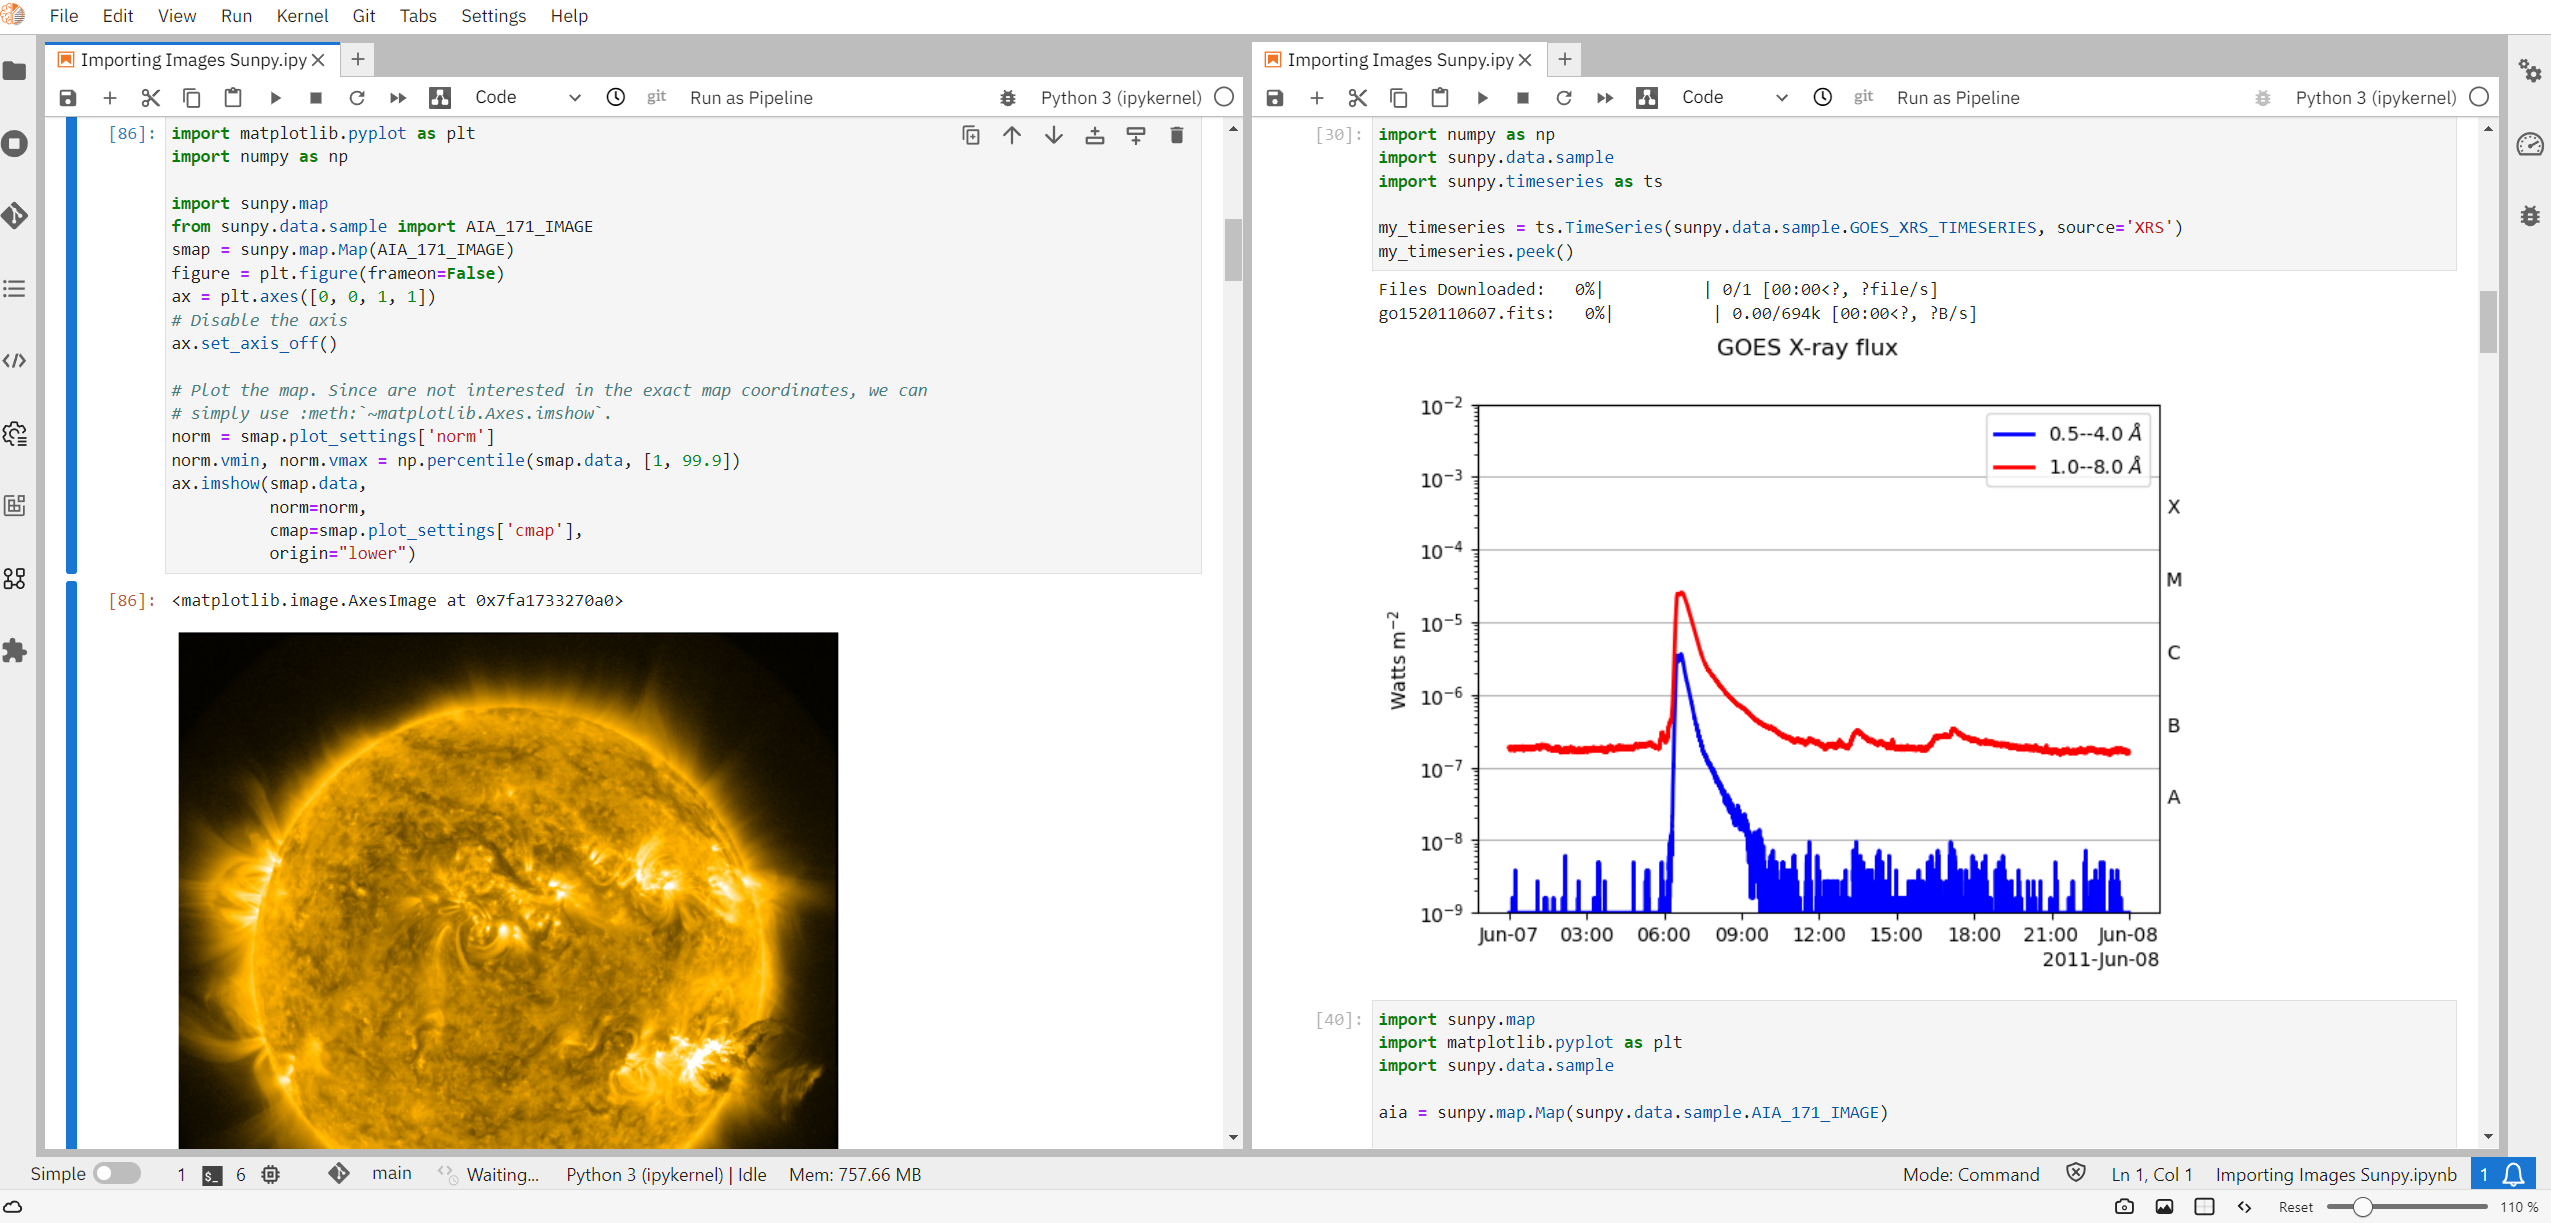 image shows an example of a Jupyter notebook